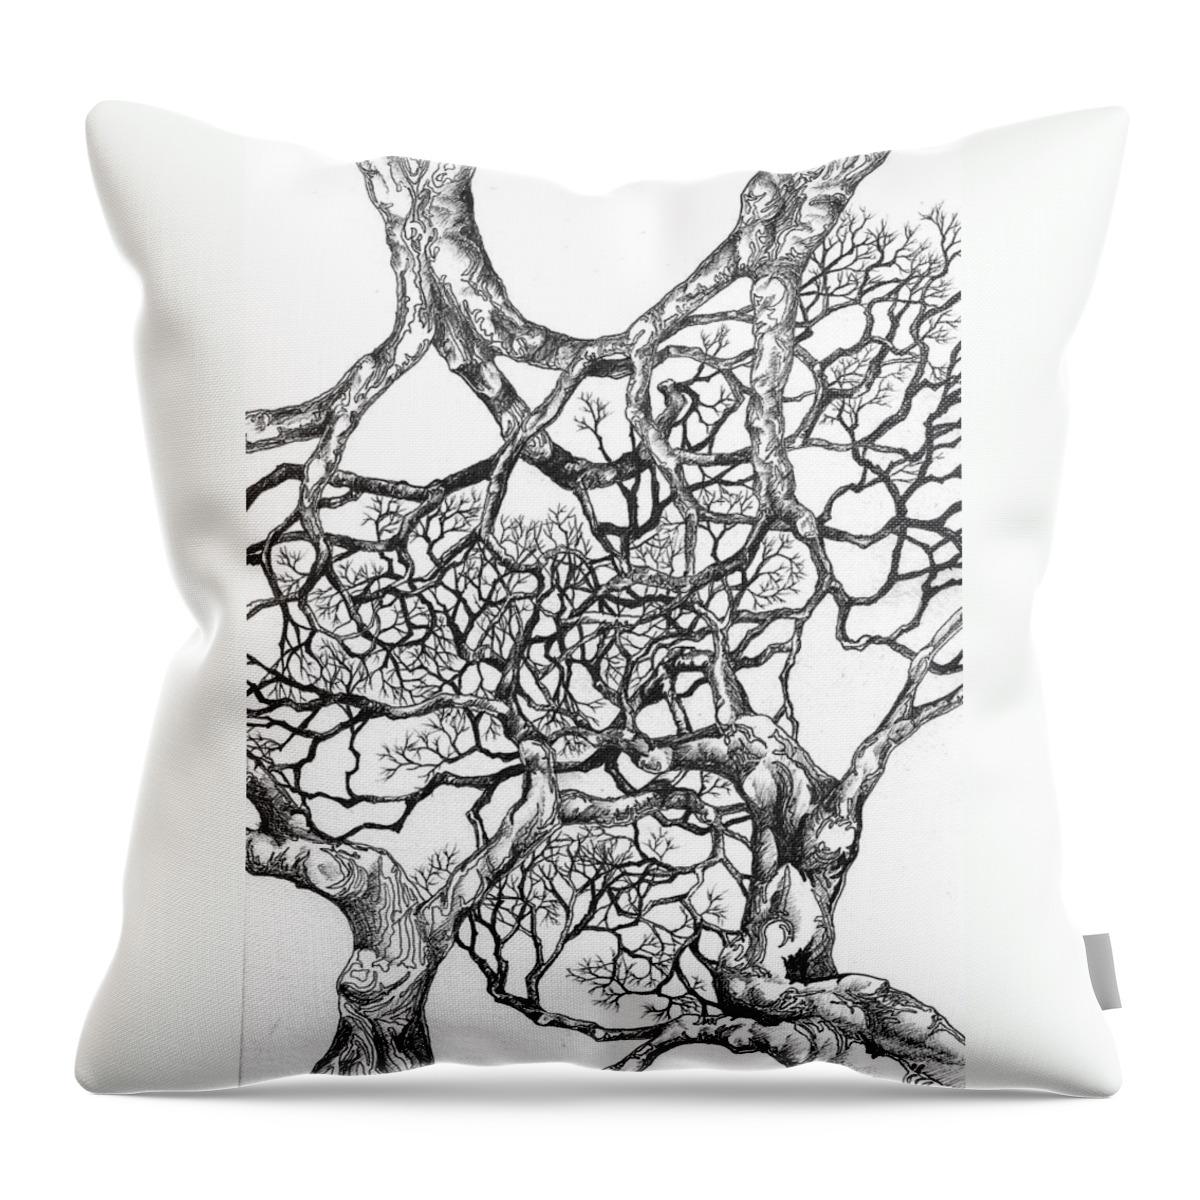 Tree Digital Art Digital Art Digital Art Throw Pillow featuring the digital art Tree 18 by Brian Kirchner